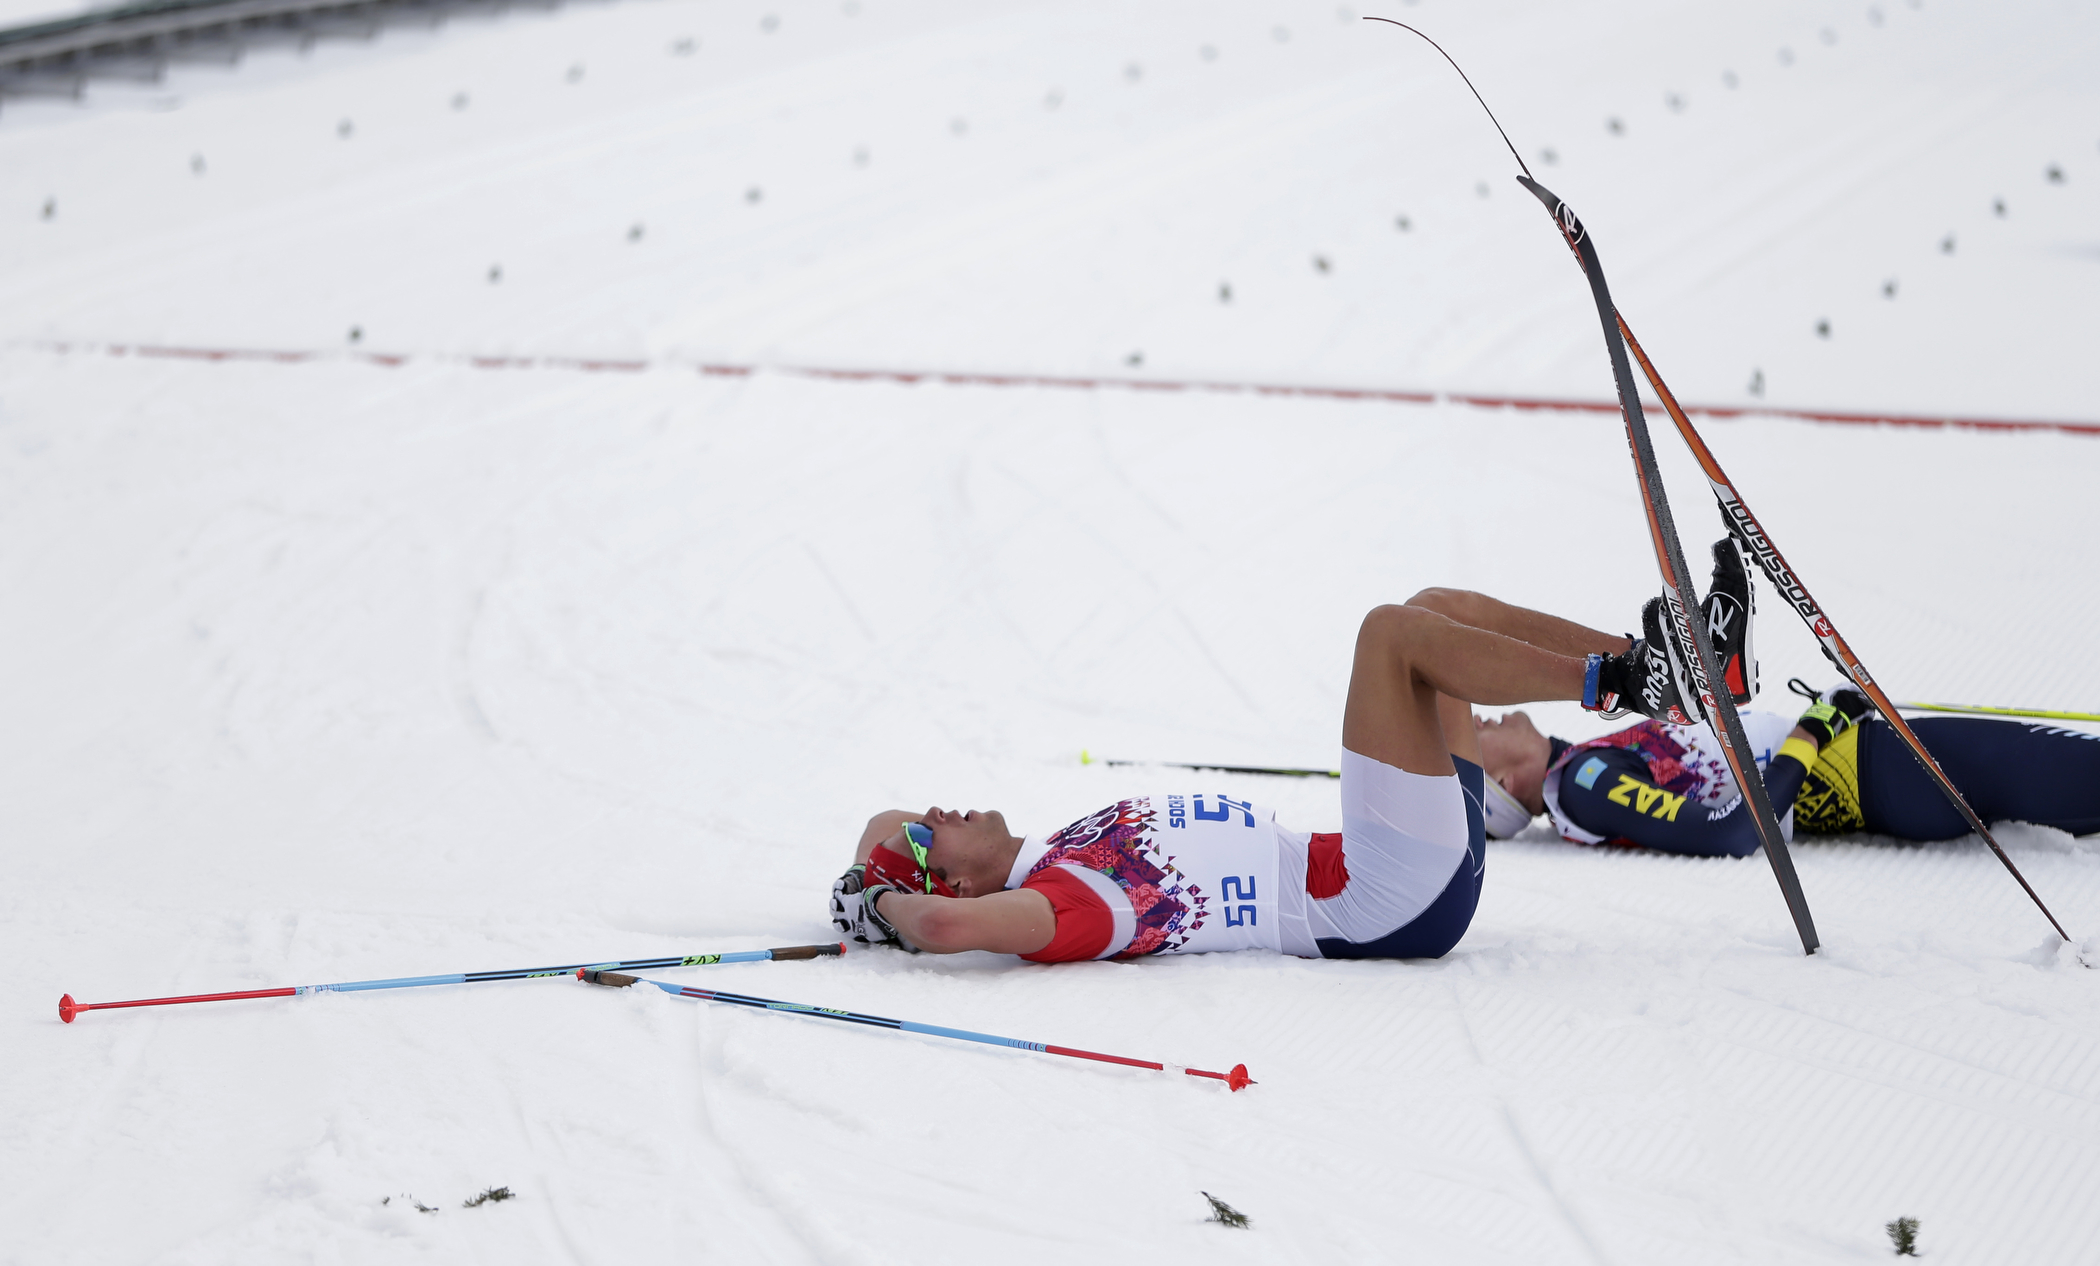 Norway's Chris Andre Jespersen rests in the finish area after competing in shorts in the men's 15K classical-style cross-country race at the 2014 Winter Olympics, Friday, Feb. 14, 2014, in Krasnaya Polyana, Russia.